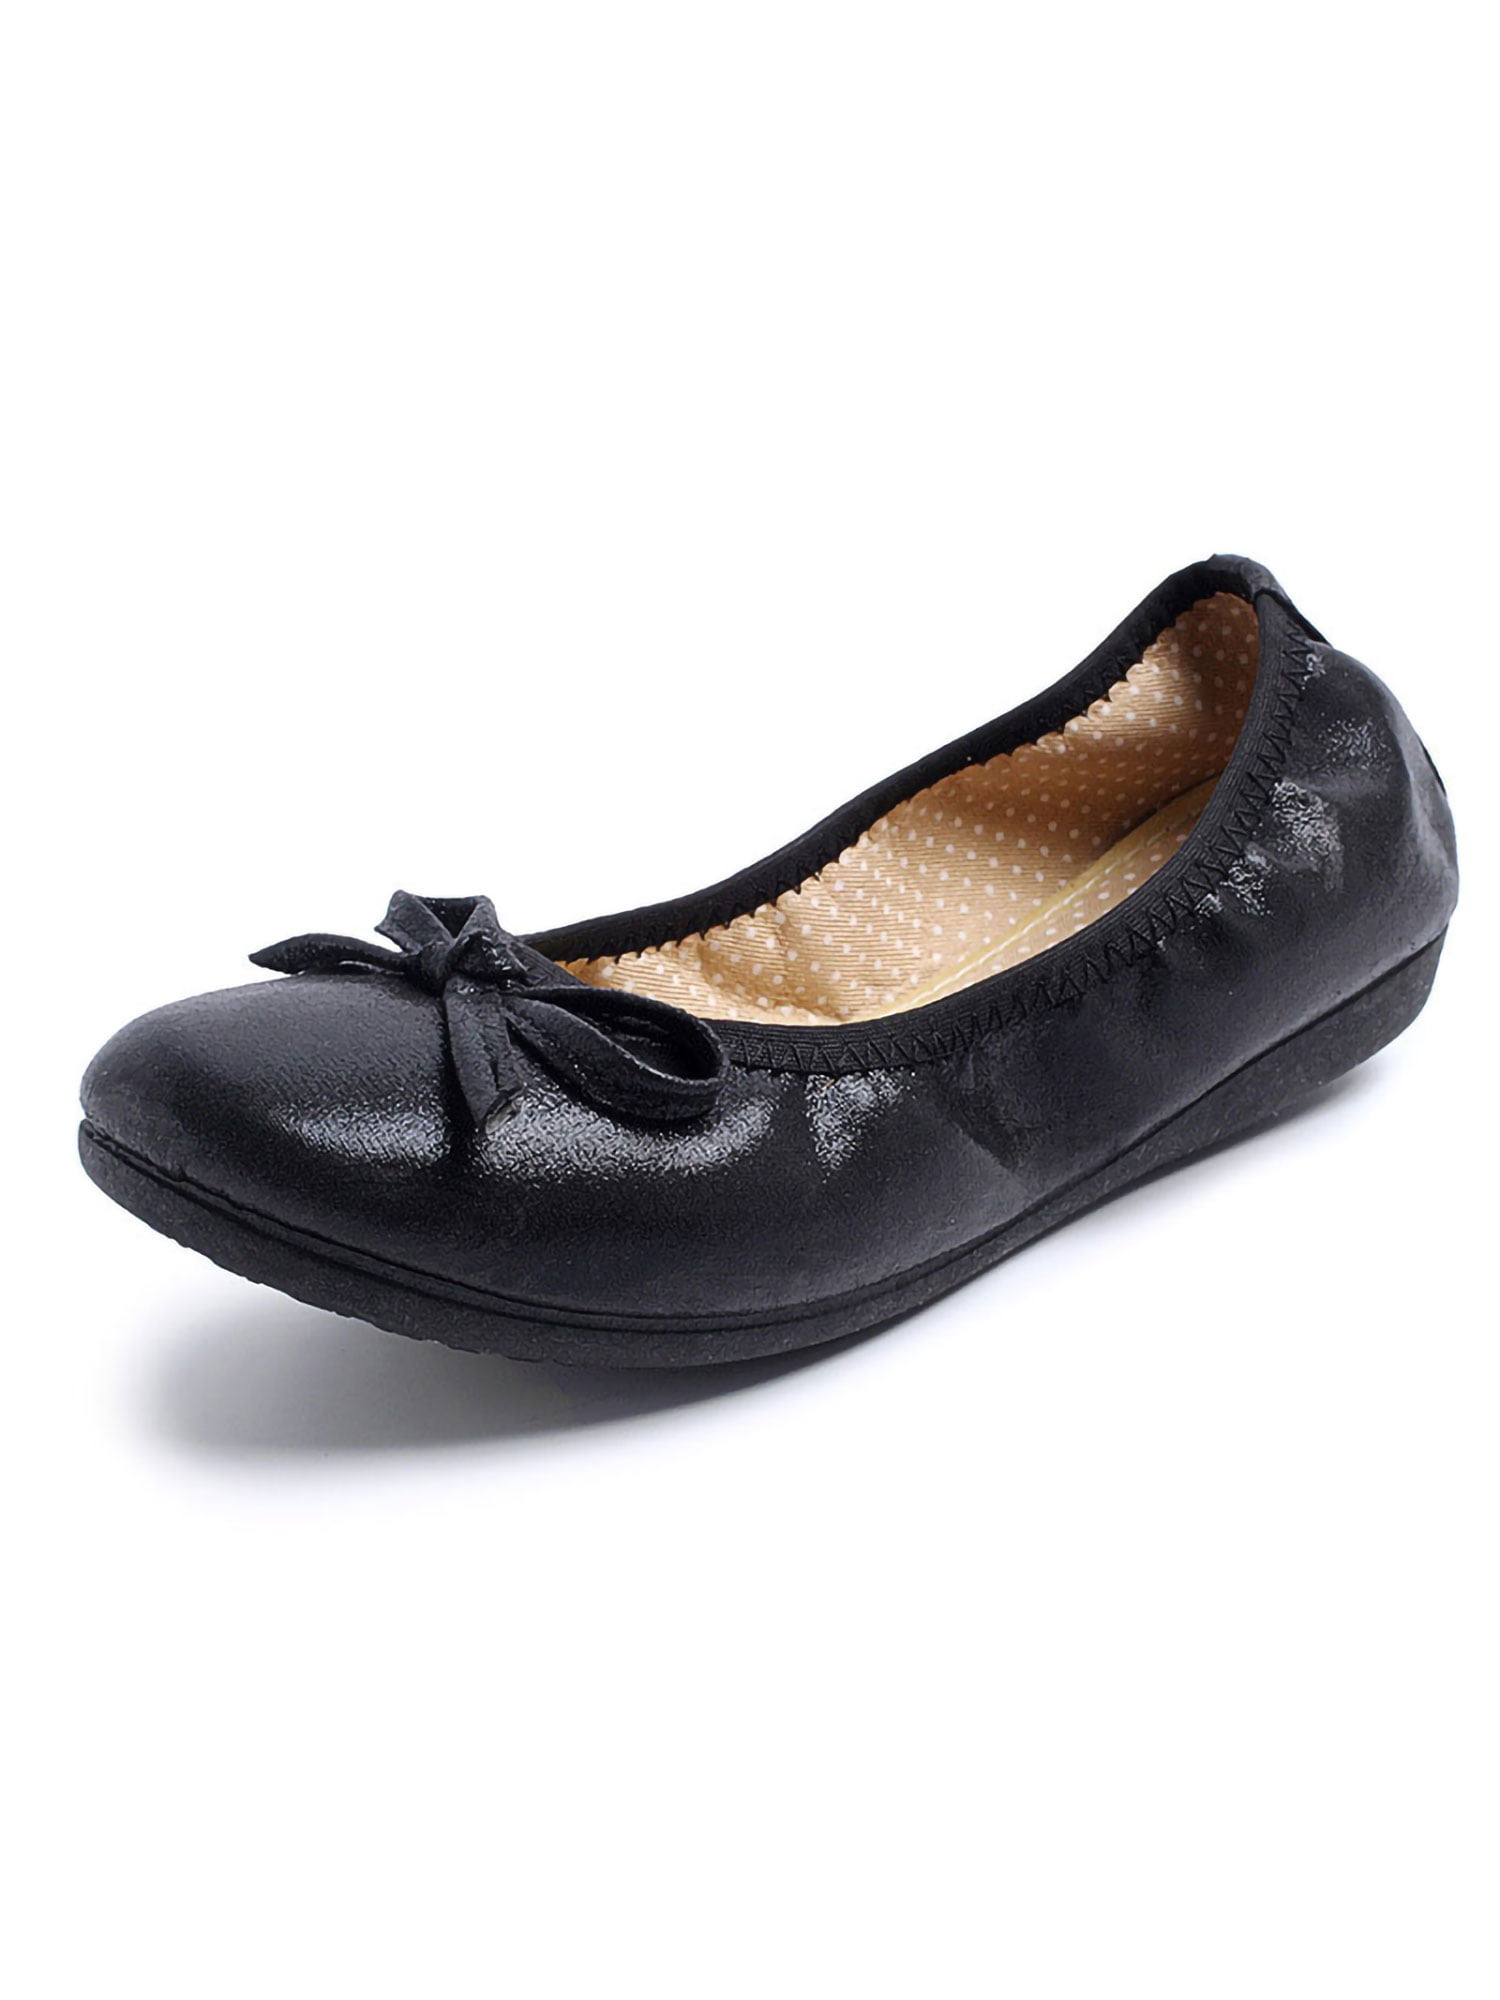 Details about   Womens Slip On Loafers Patent Leather Sweet Flats Shoes Spring Bowknot Tassel 